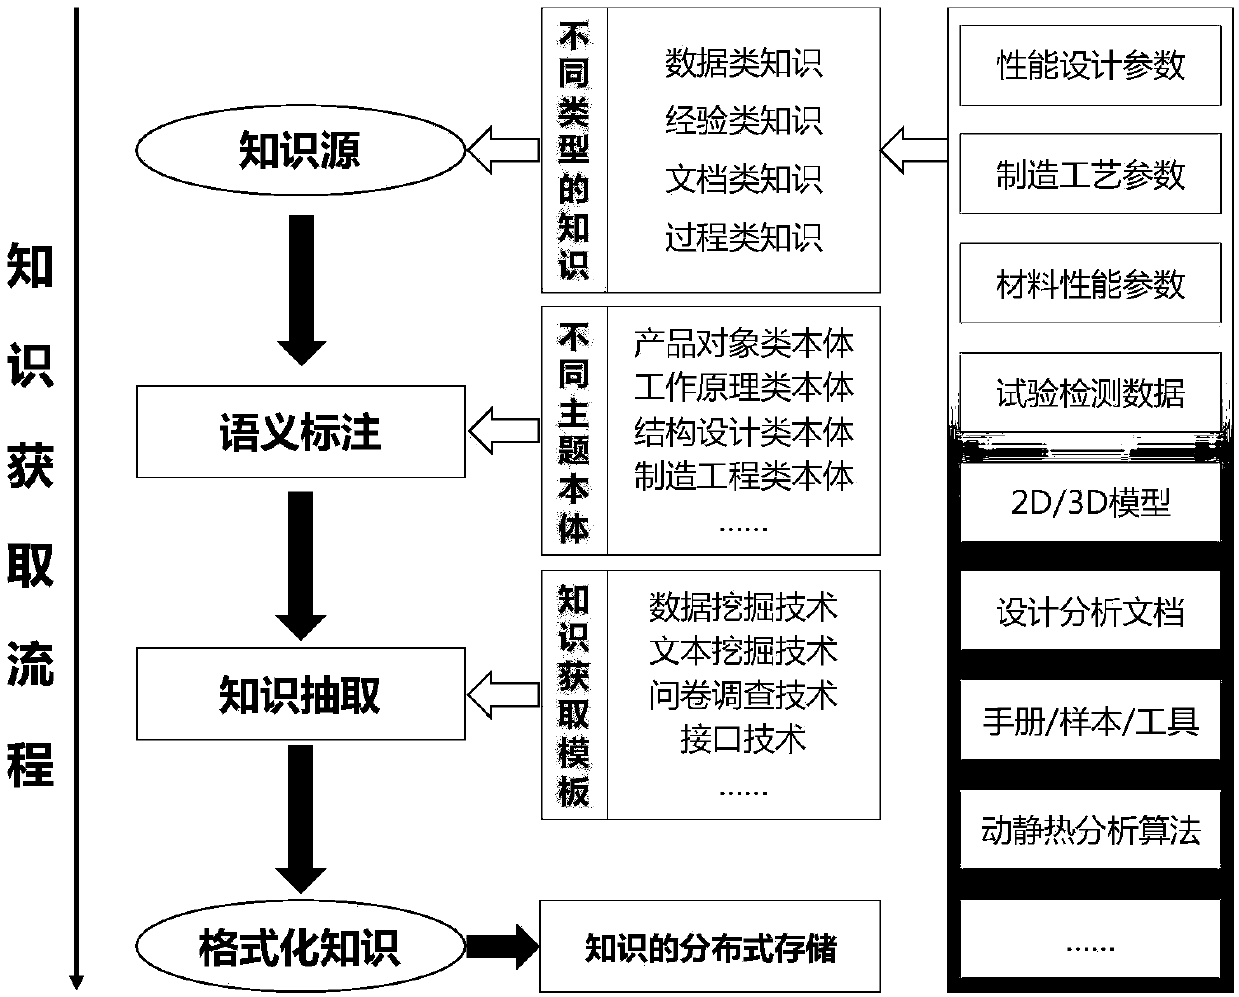 Knowledge service system and method suitable for full life cycle of high-end equipment